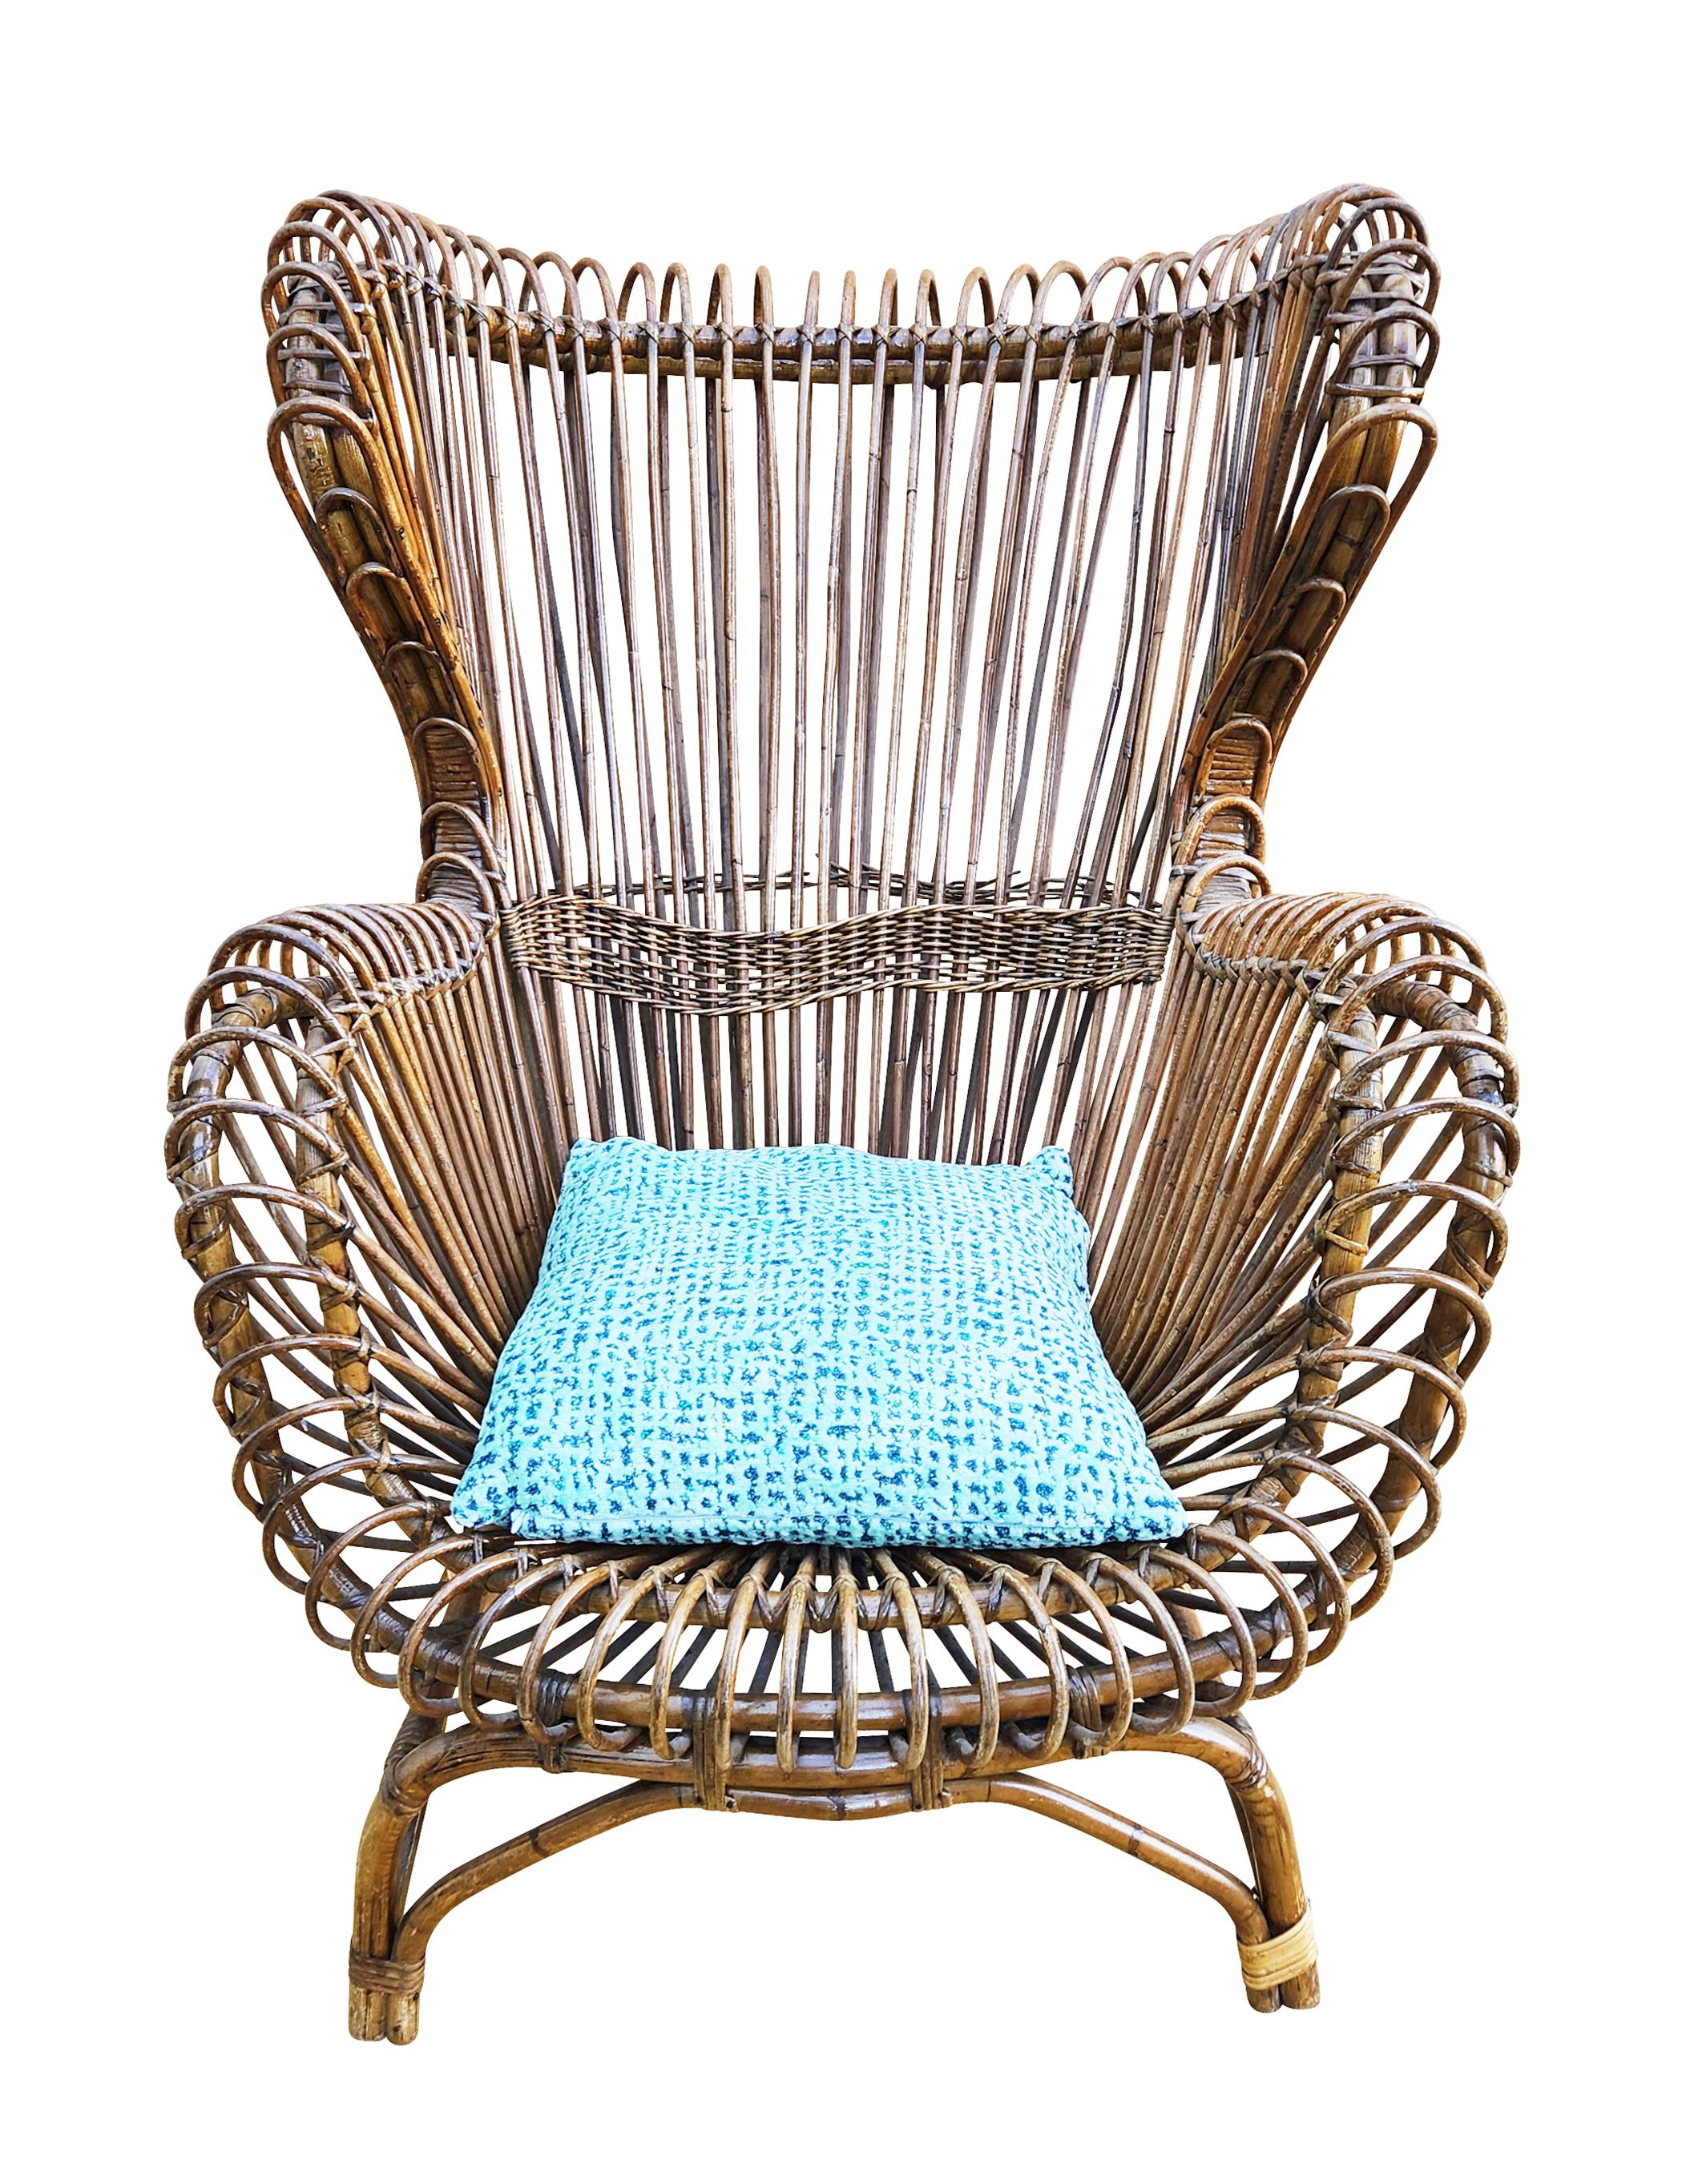 Sculptural and comfortable Italian Mid-Century lounge chair made in rattan by Bonacina. The design is attributed to either Franco Albini or Tito Agnoli who worked extensively with this material.

Condition: Good vintage condition, minor wear